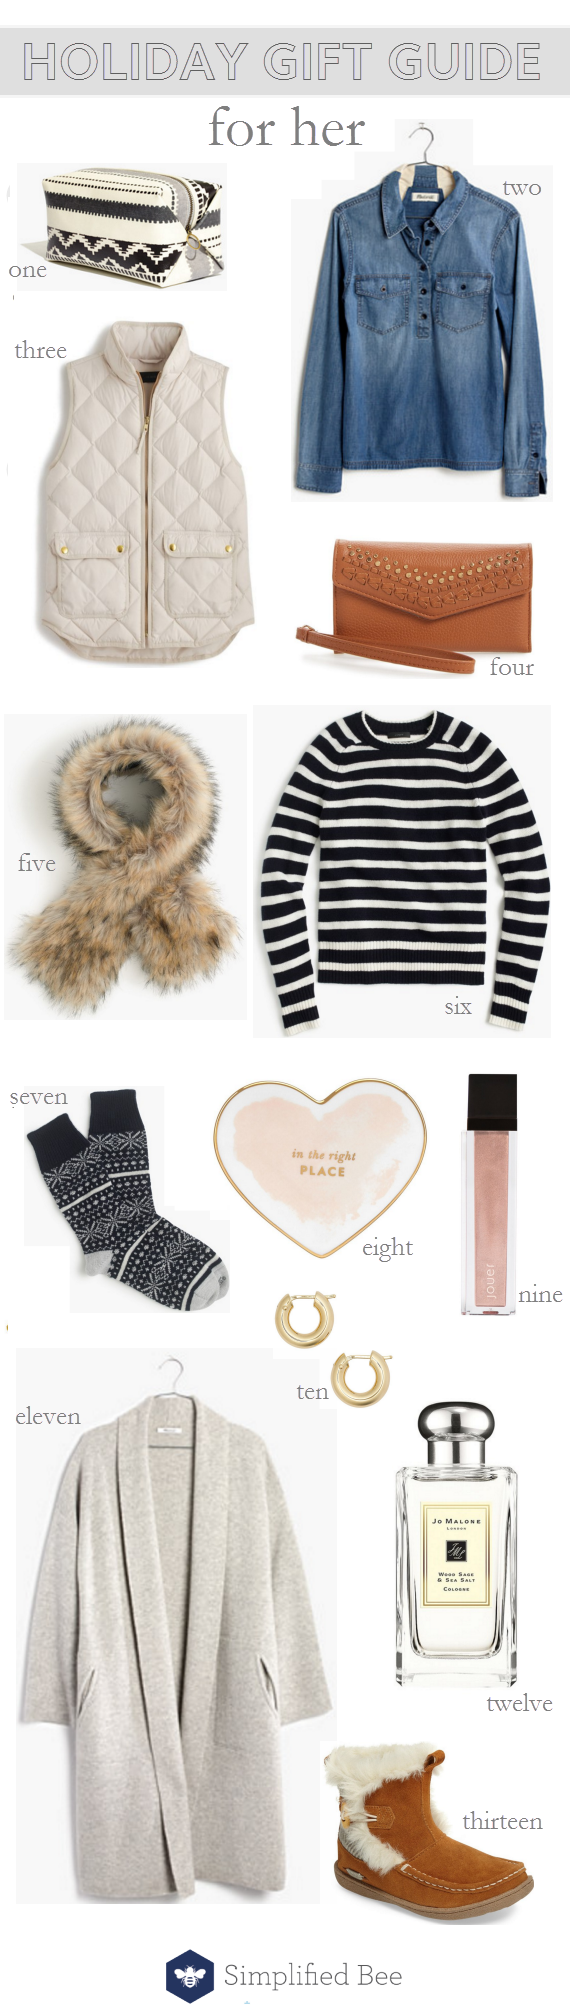 holiday gift guide 2016 // for her #giftguide #holiday #fashion